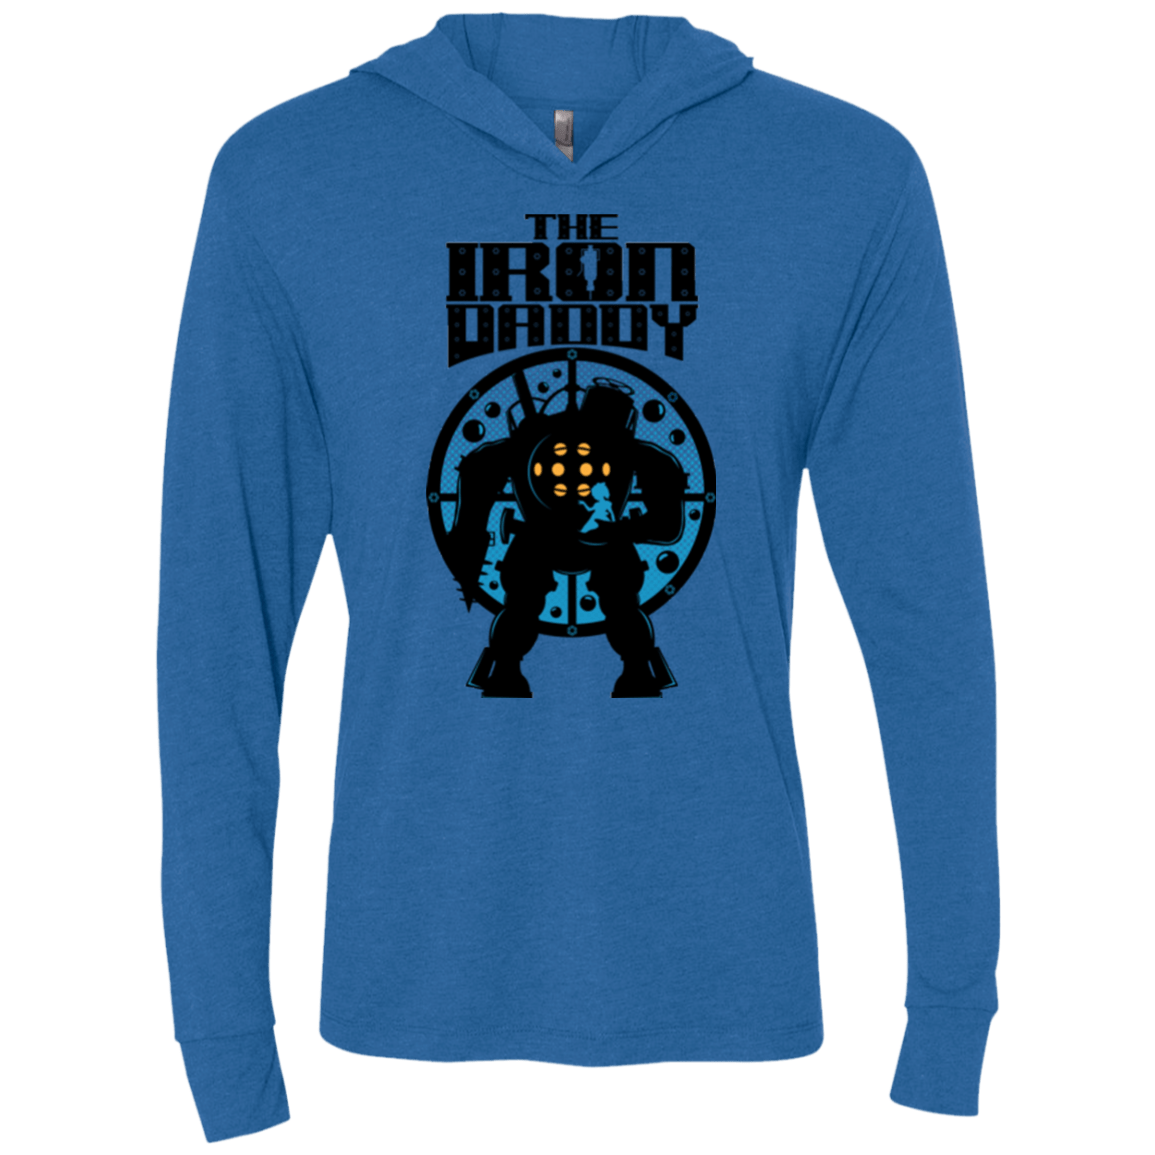 T-Shirts Vintage Royal / X-Small The Iron Daddy Triblend Long Sleeve Hoodie Tee